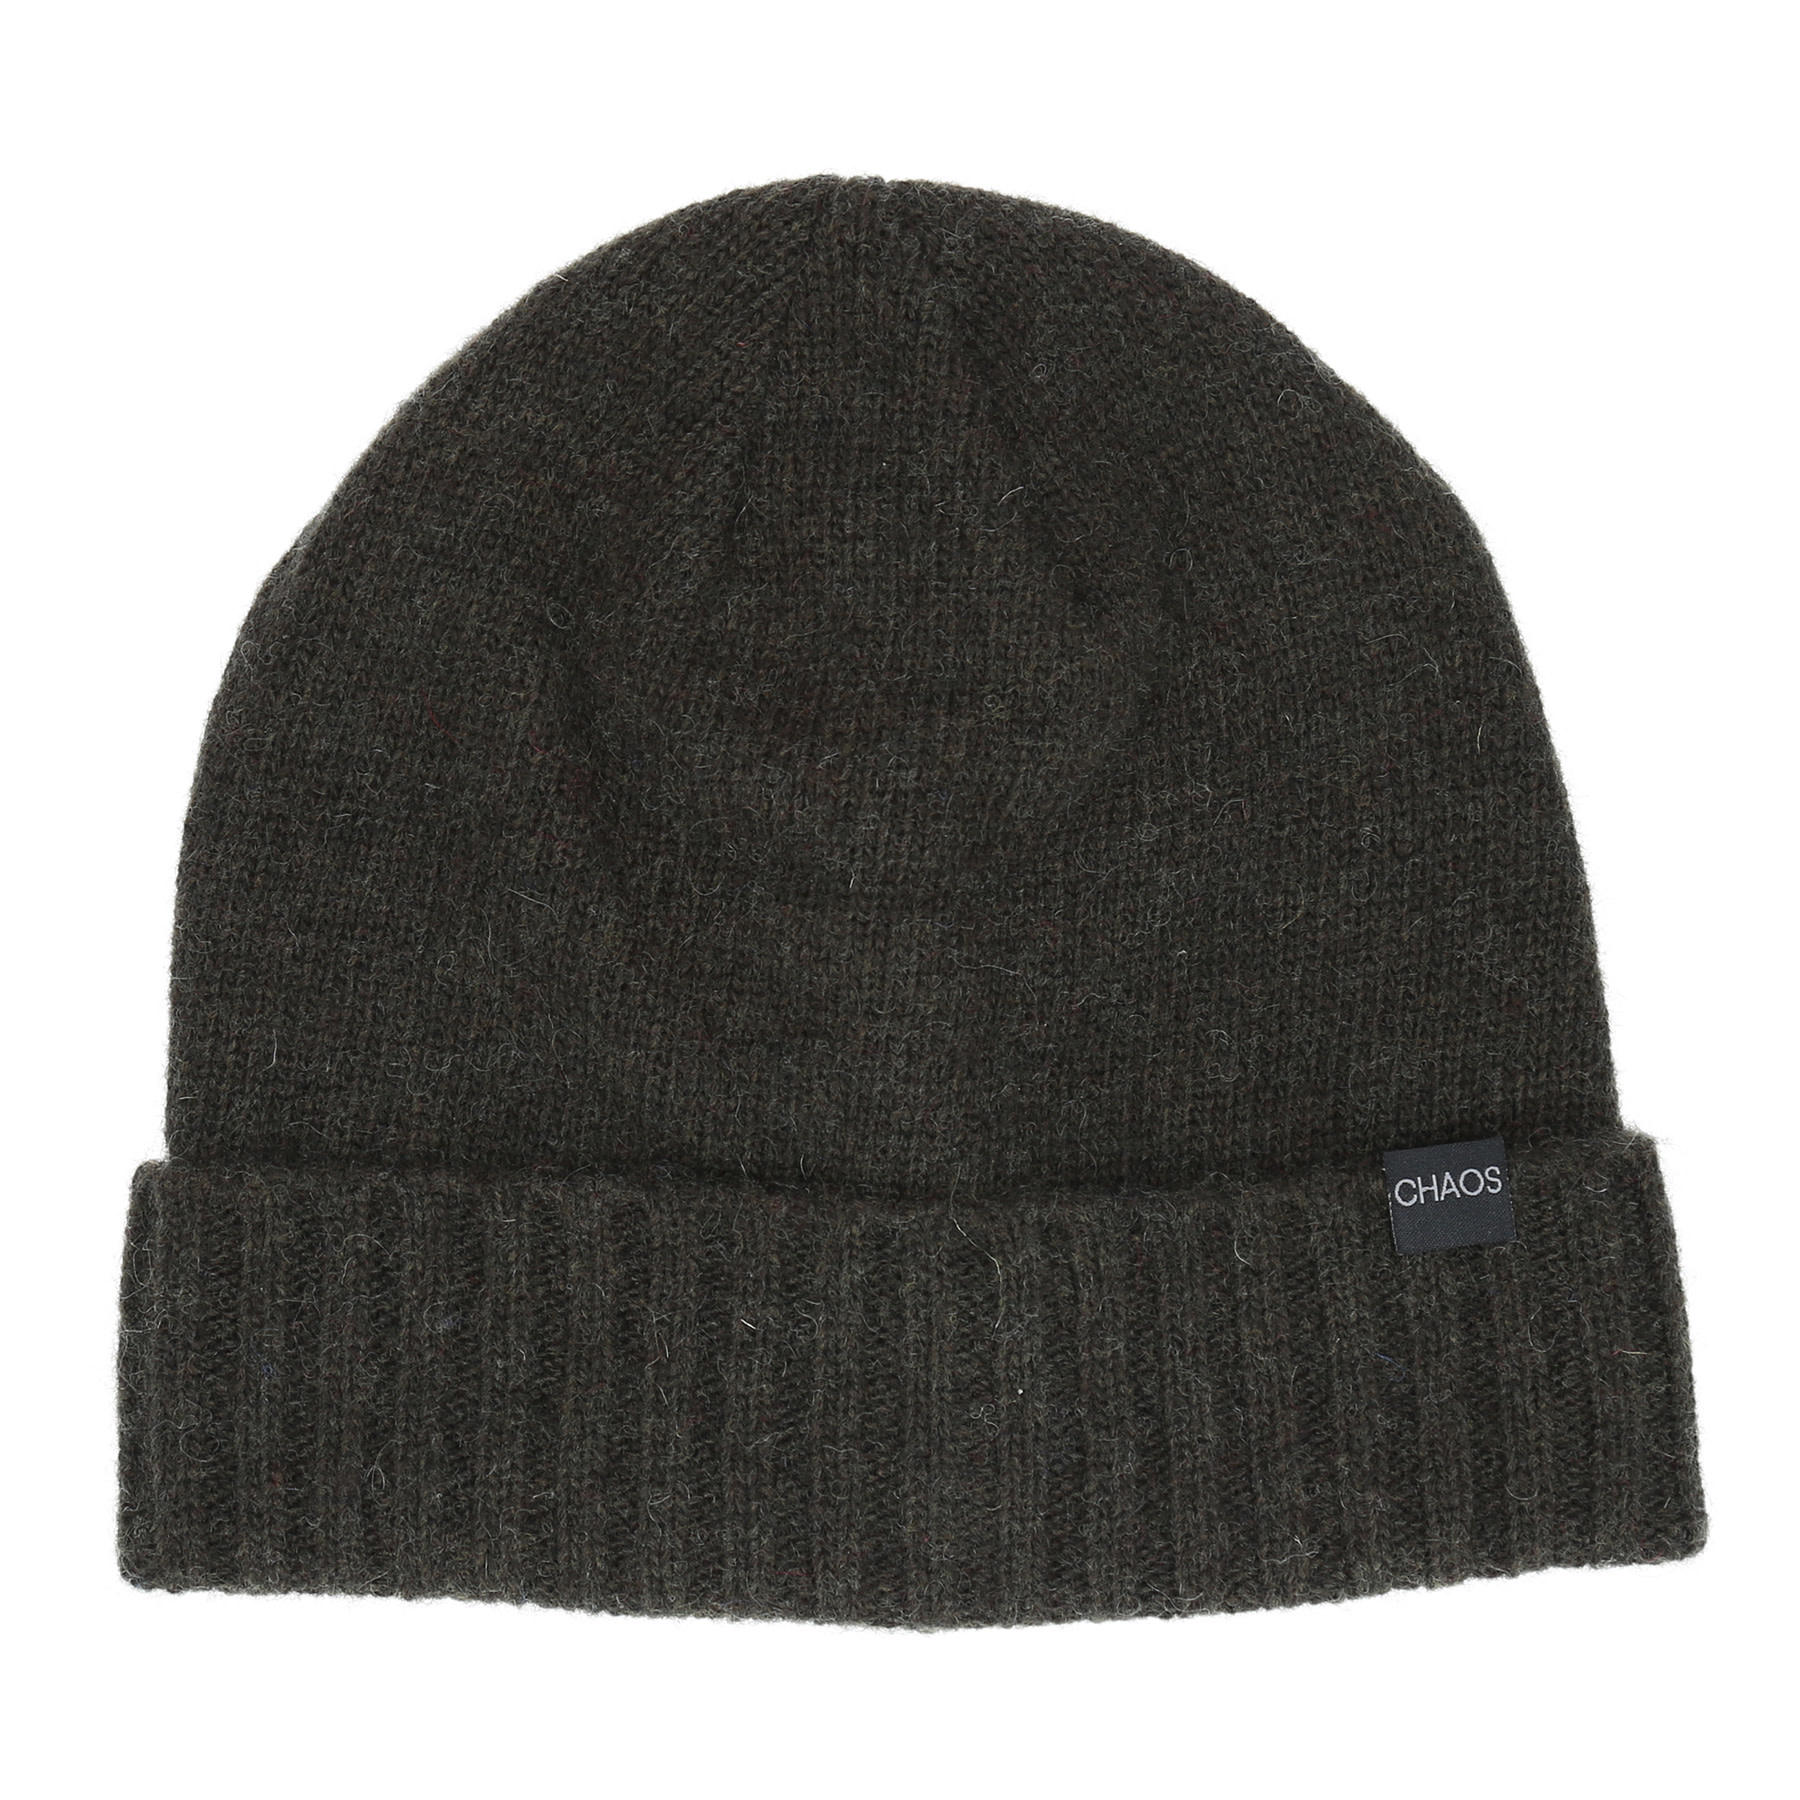 Chaos 2804 Blinder Tuque 80%  Wool